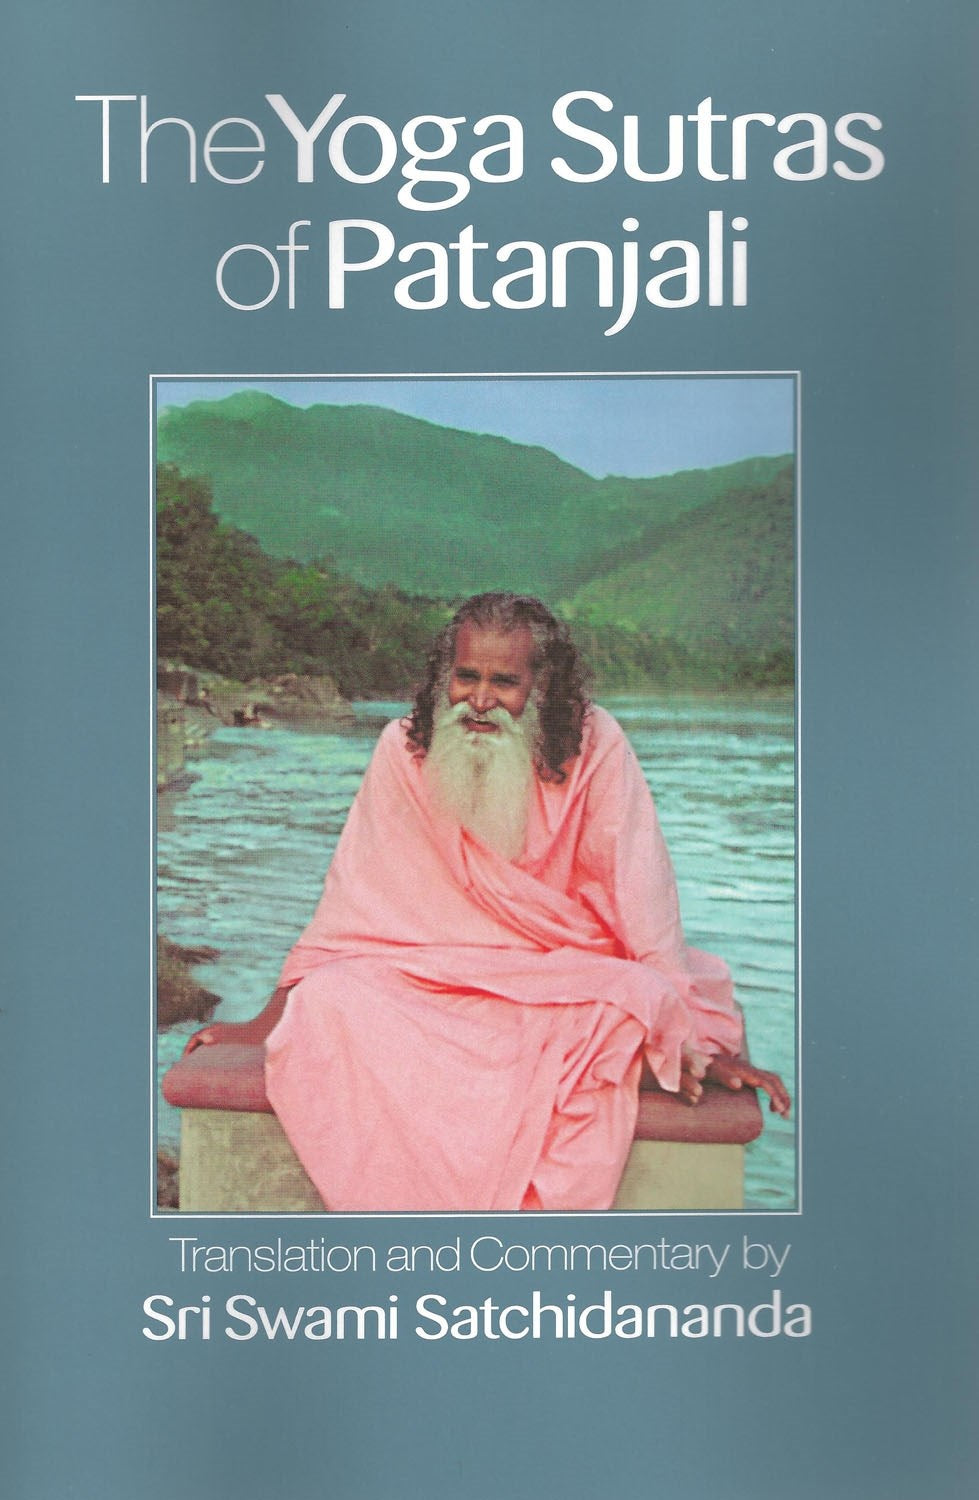 The Yoga Sutras of Patanjali by Sri Swami Satchidananda